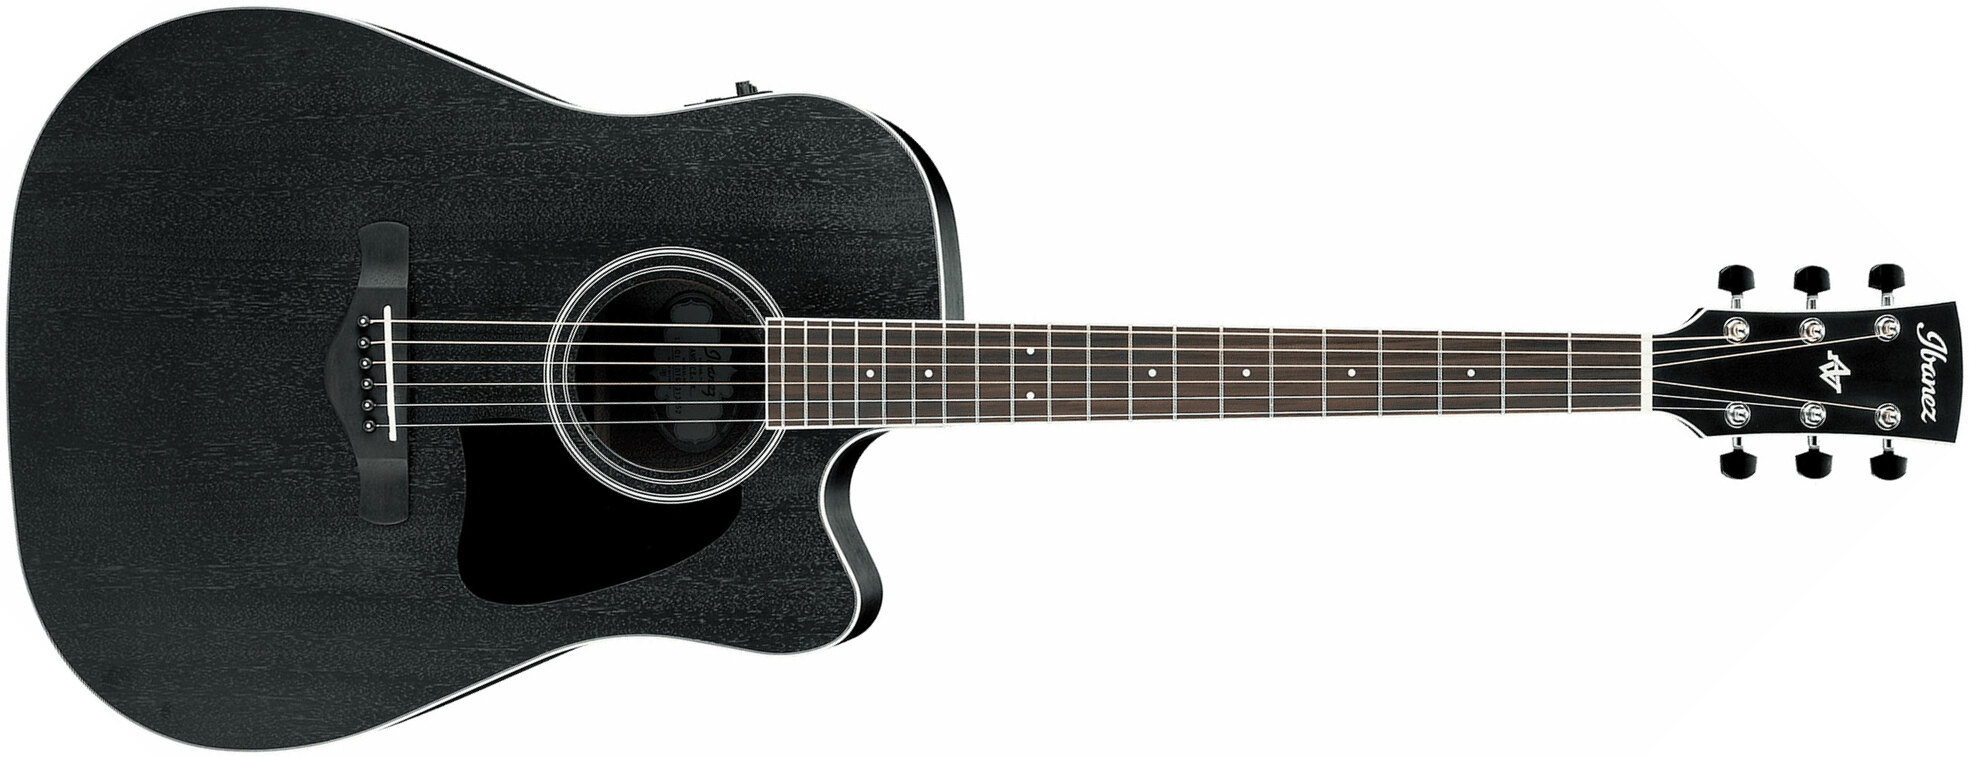 Ibanez Aw8412ce Wk Artwood Dreadnought Cw 12c Tout Okoume Ova - Weathered Black Open Pore - Electro acoustic guitar - Main picture